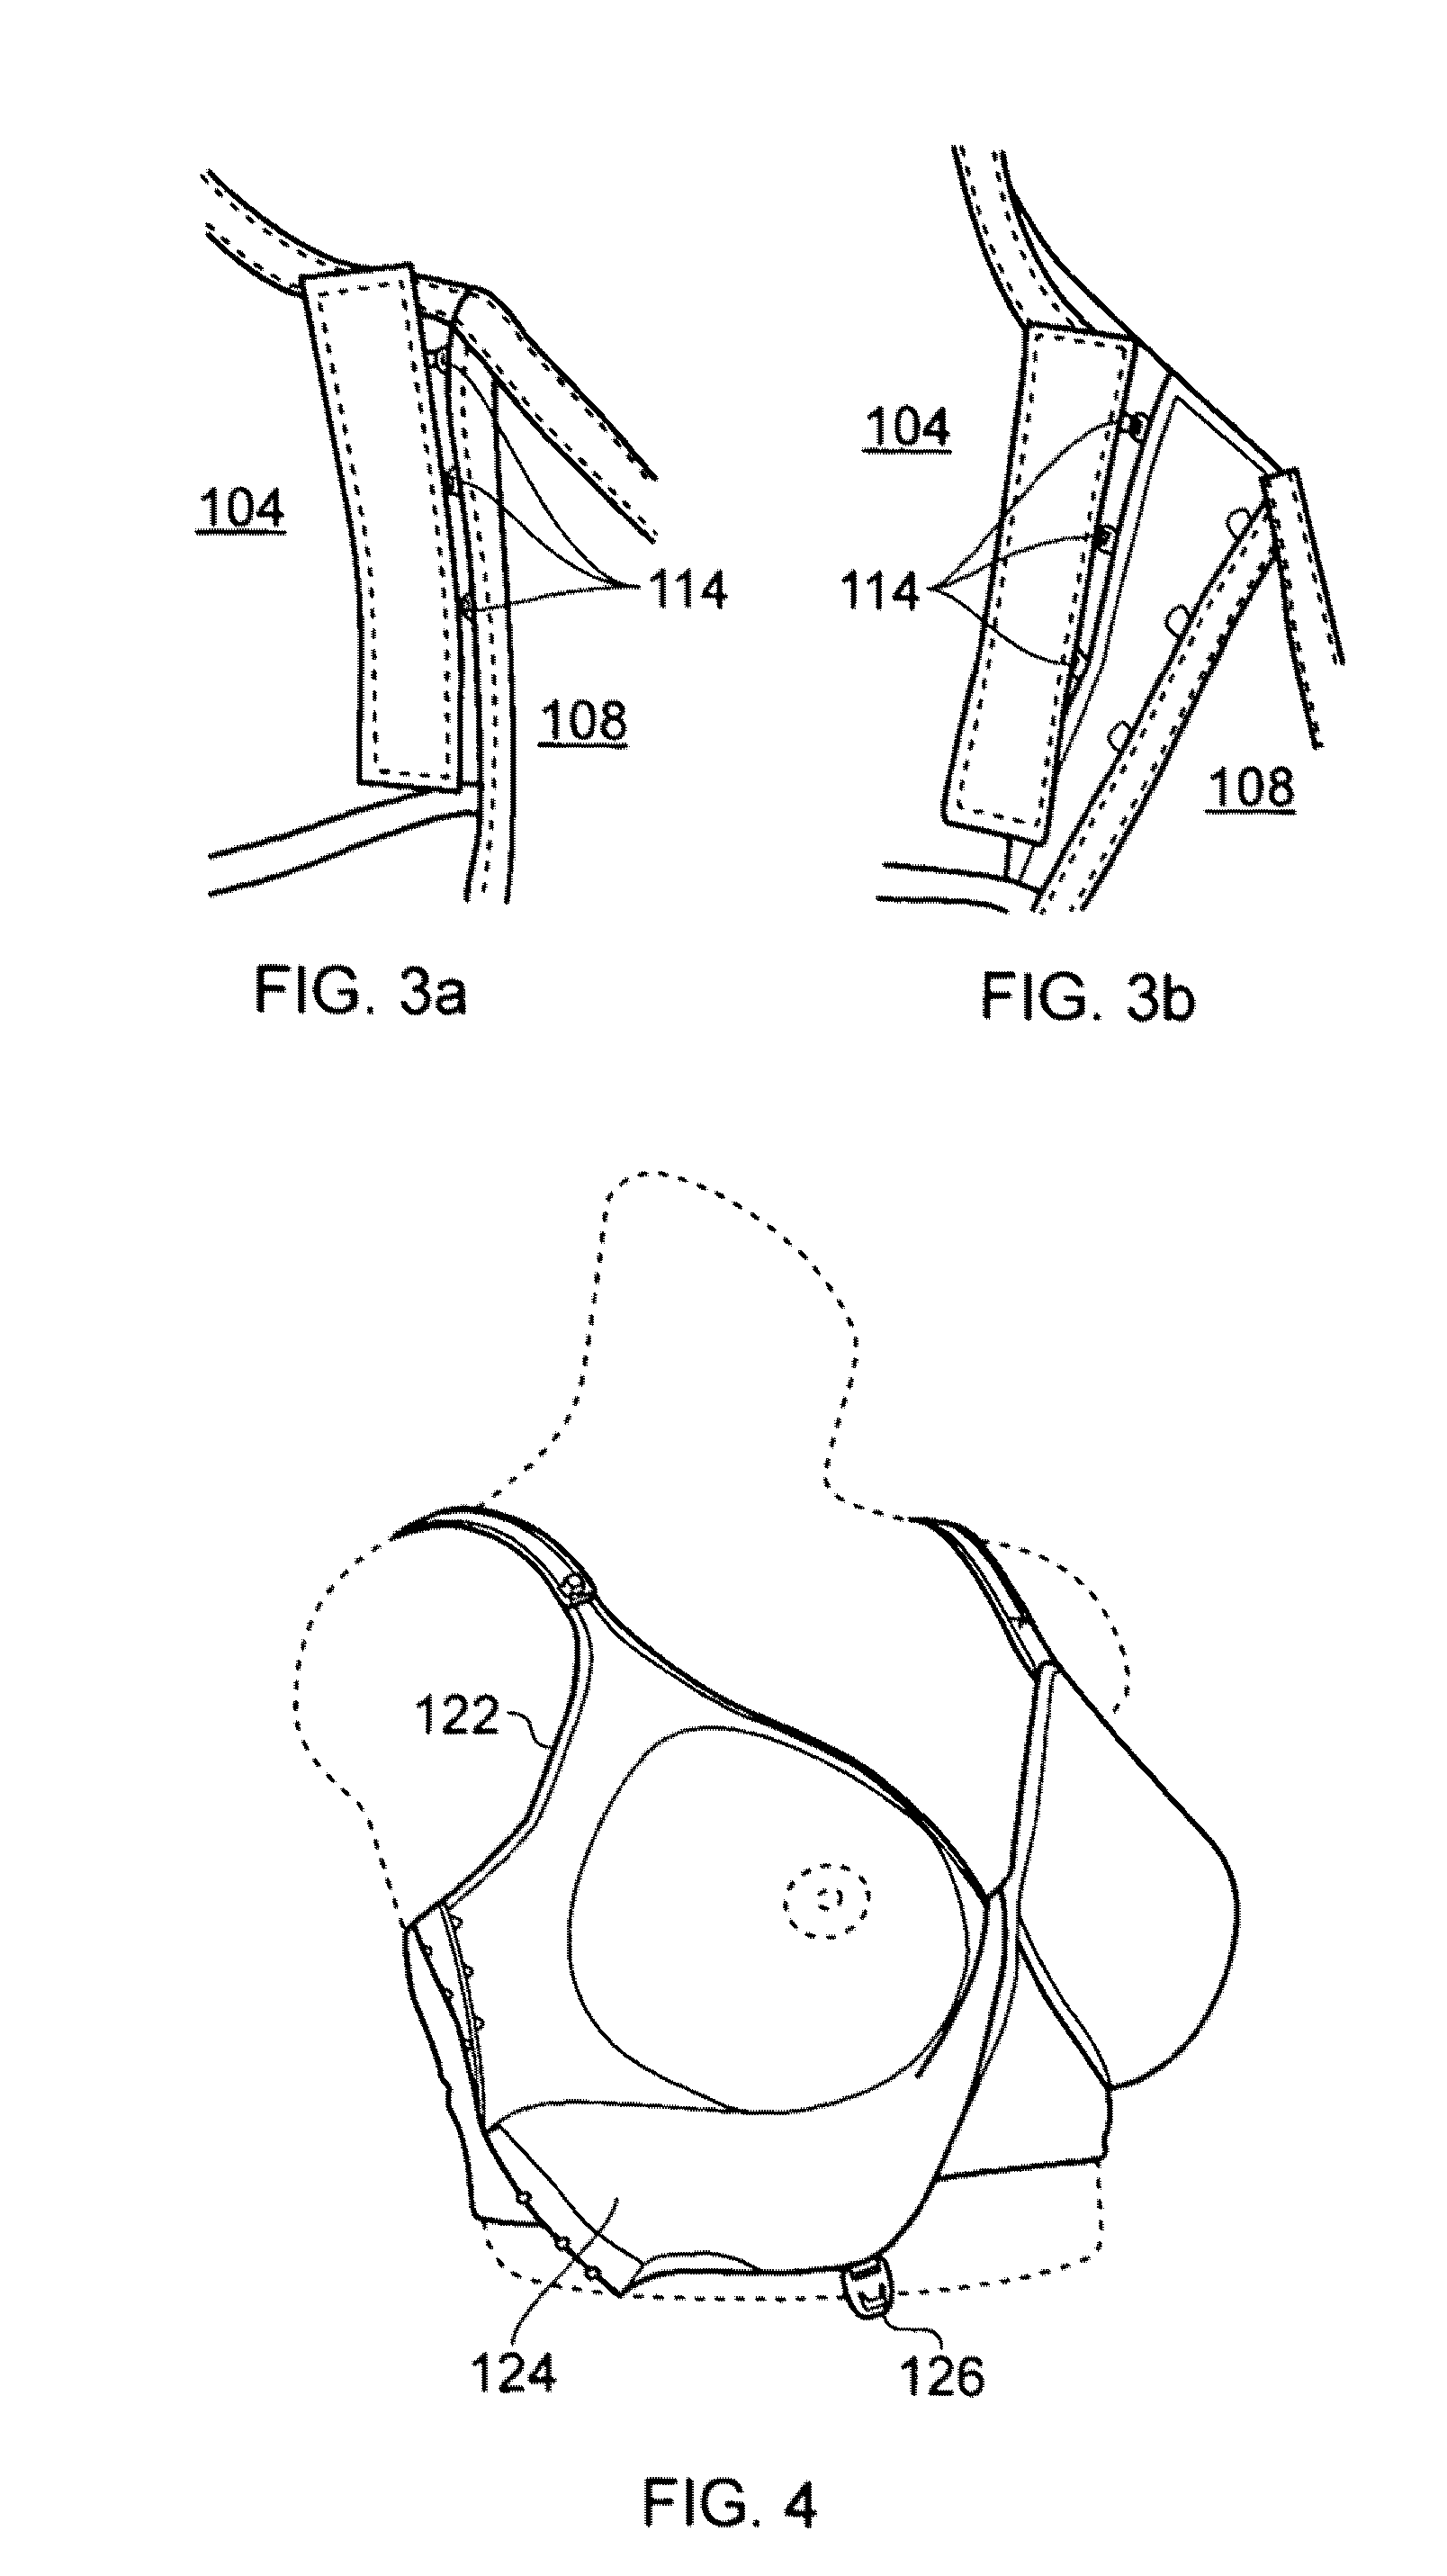 An Expandable Brassiere